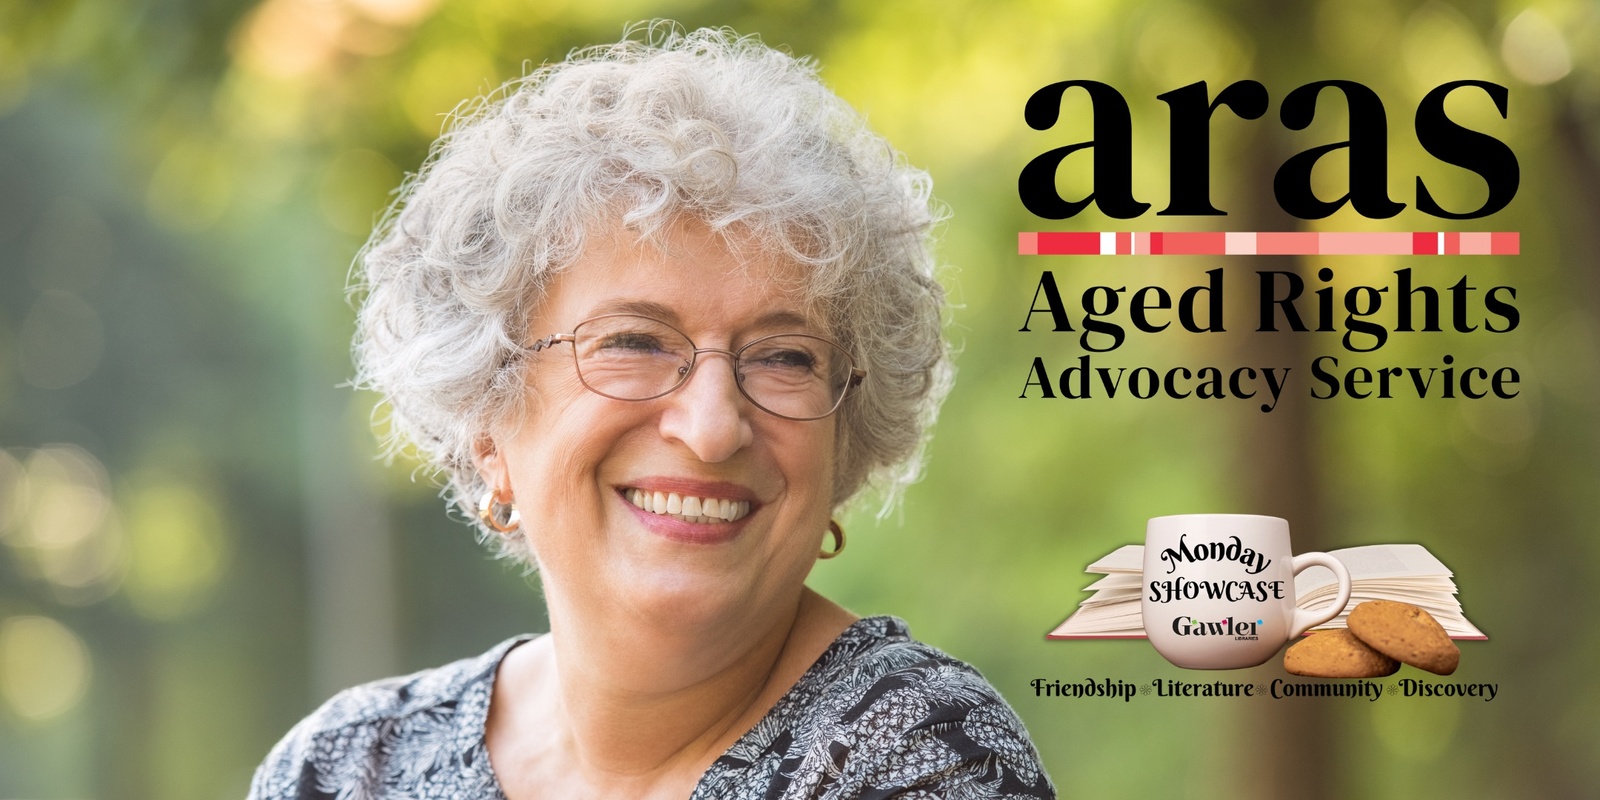 Banner image for Monday Showcase - guest speaker from ARAS (Aged Rights Advocacy Service)